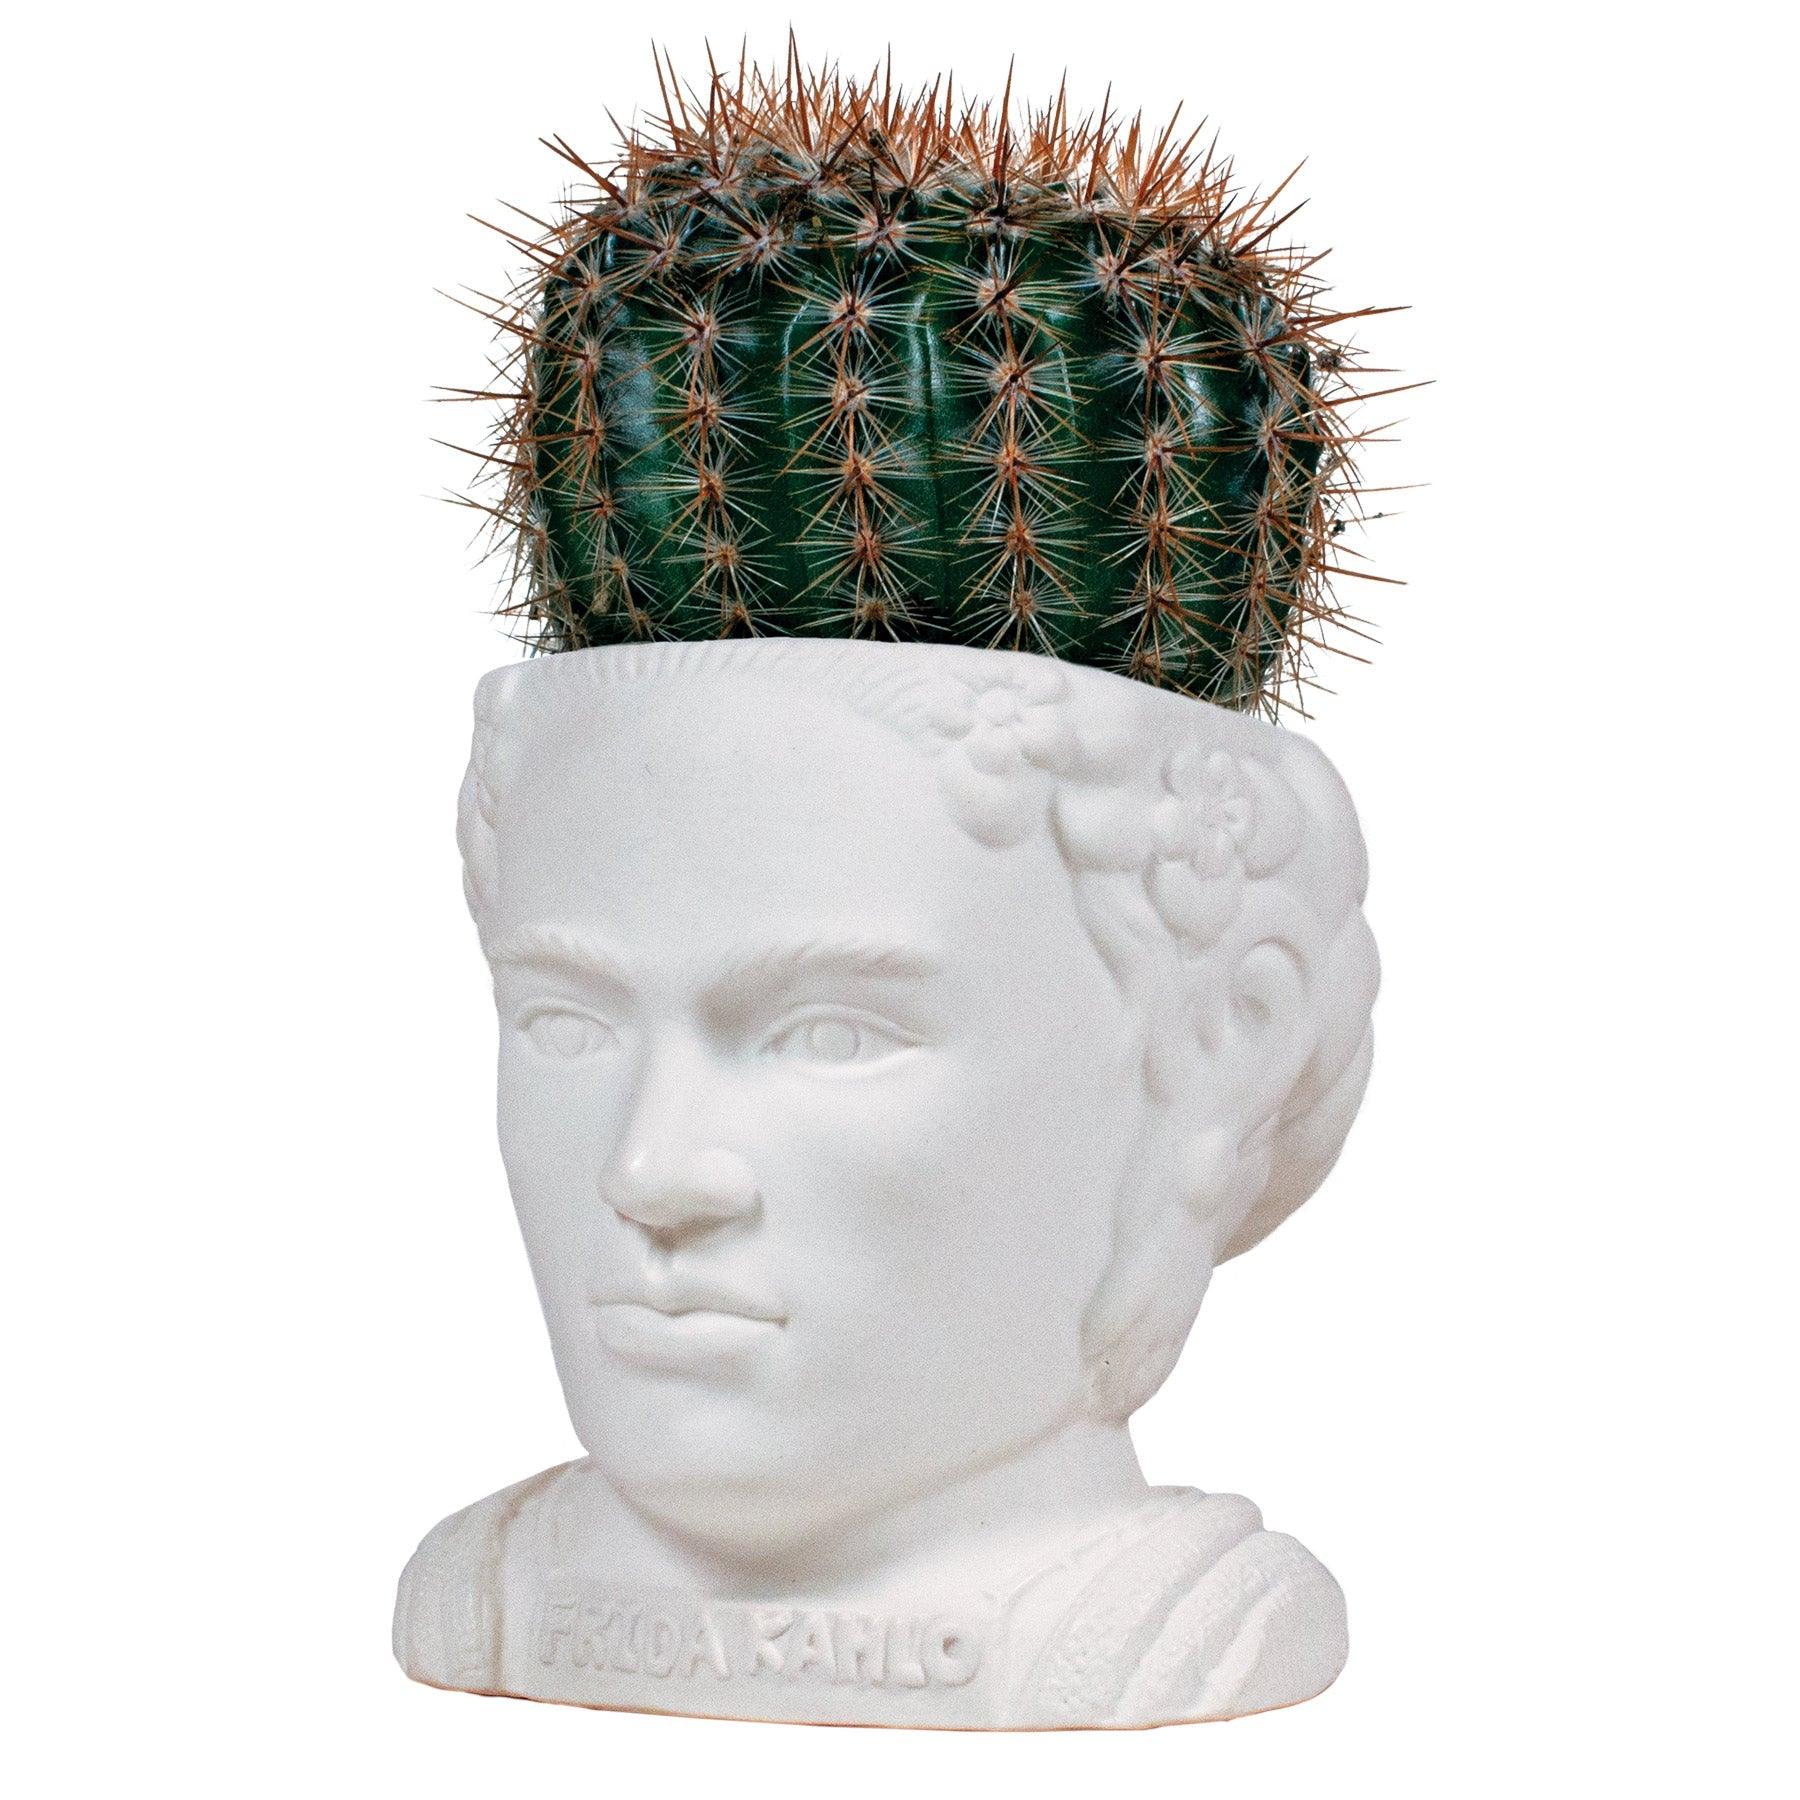 Product photo of Frida Kahlo Bust Planter, a novelty gift manufactured by The Unemployed Philosophers Guild.